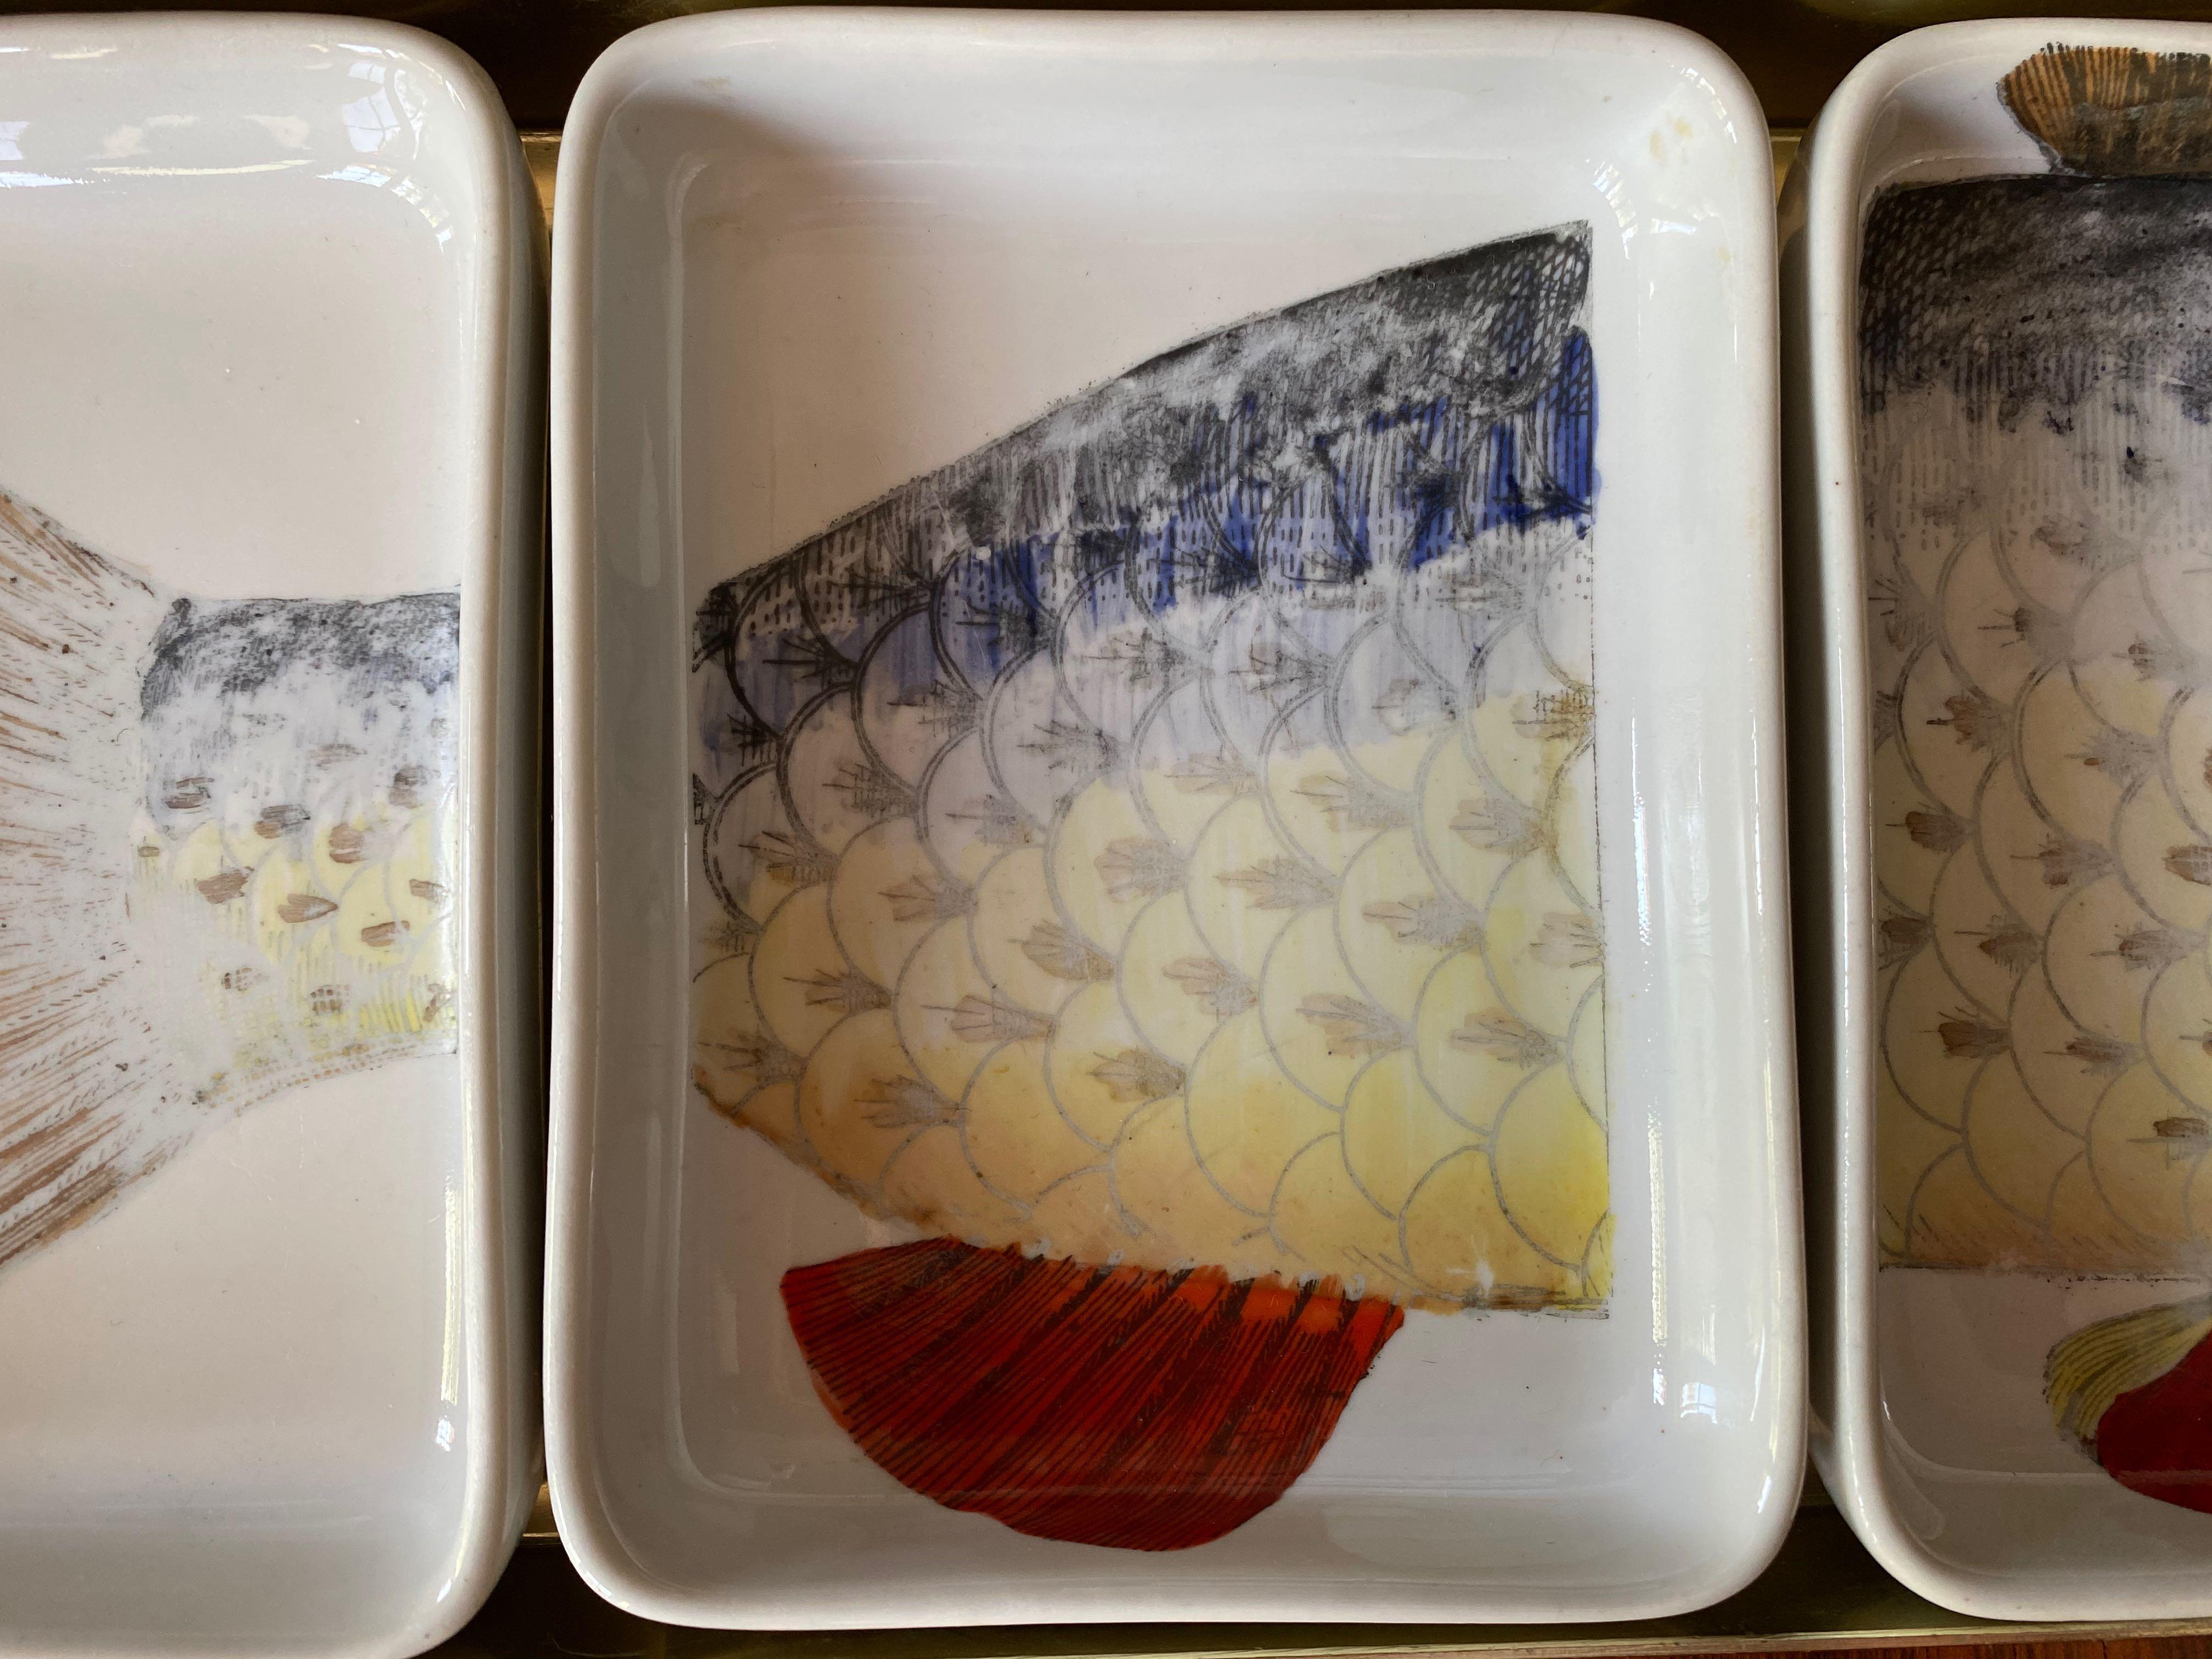 Mid-Century Modern Rare 1960s Fish Pesci Appetizer or Hors D'oeuvre Tray by Piero Fornasetti For Sale